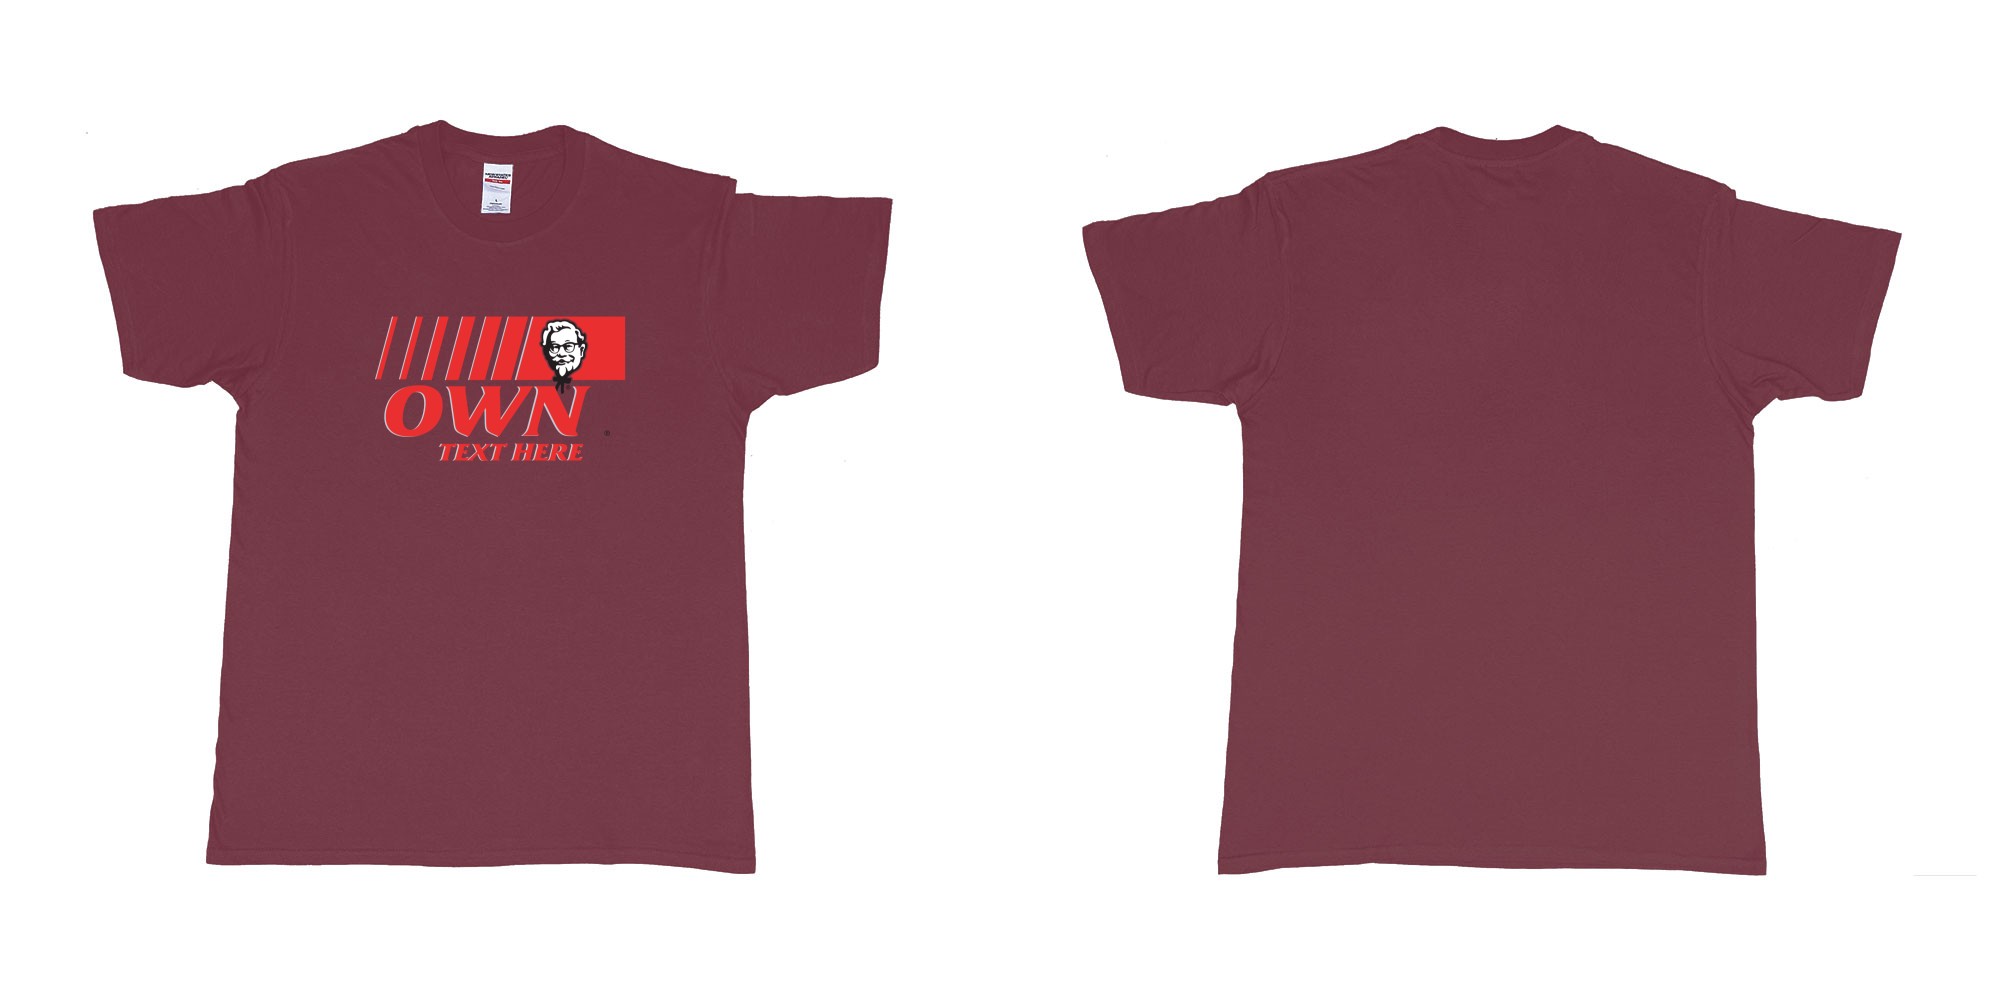 Custom tshirt design KFC in fabric color marron choice your own text made in Bali by The Pirate Way